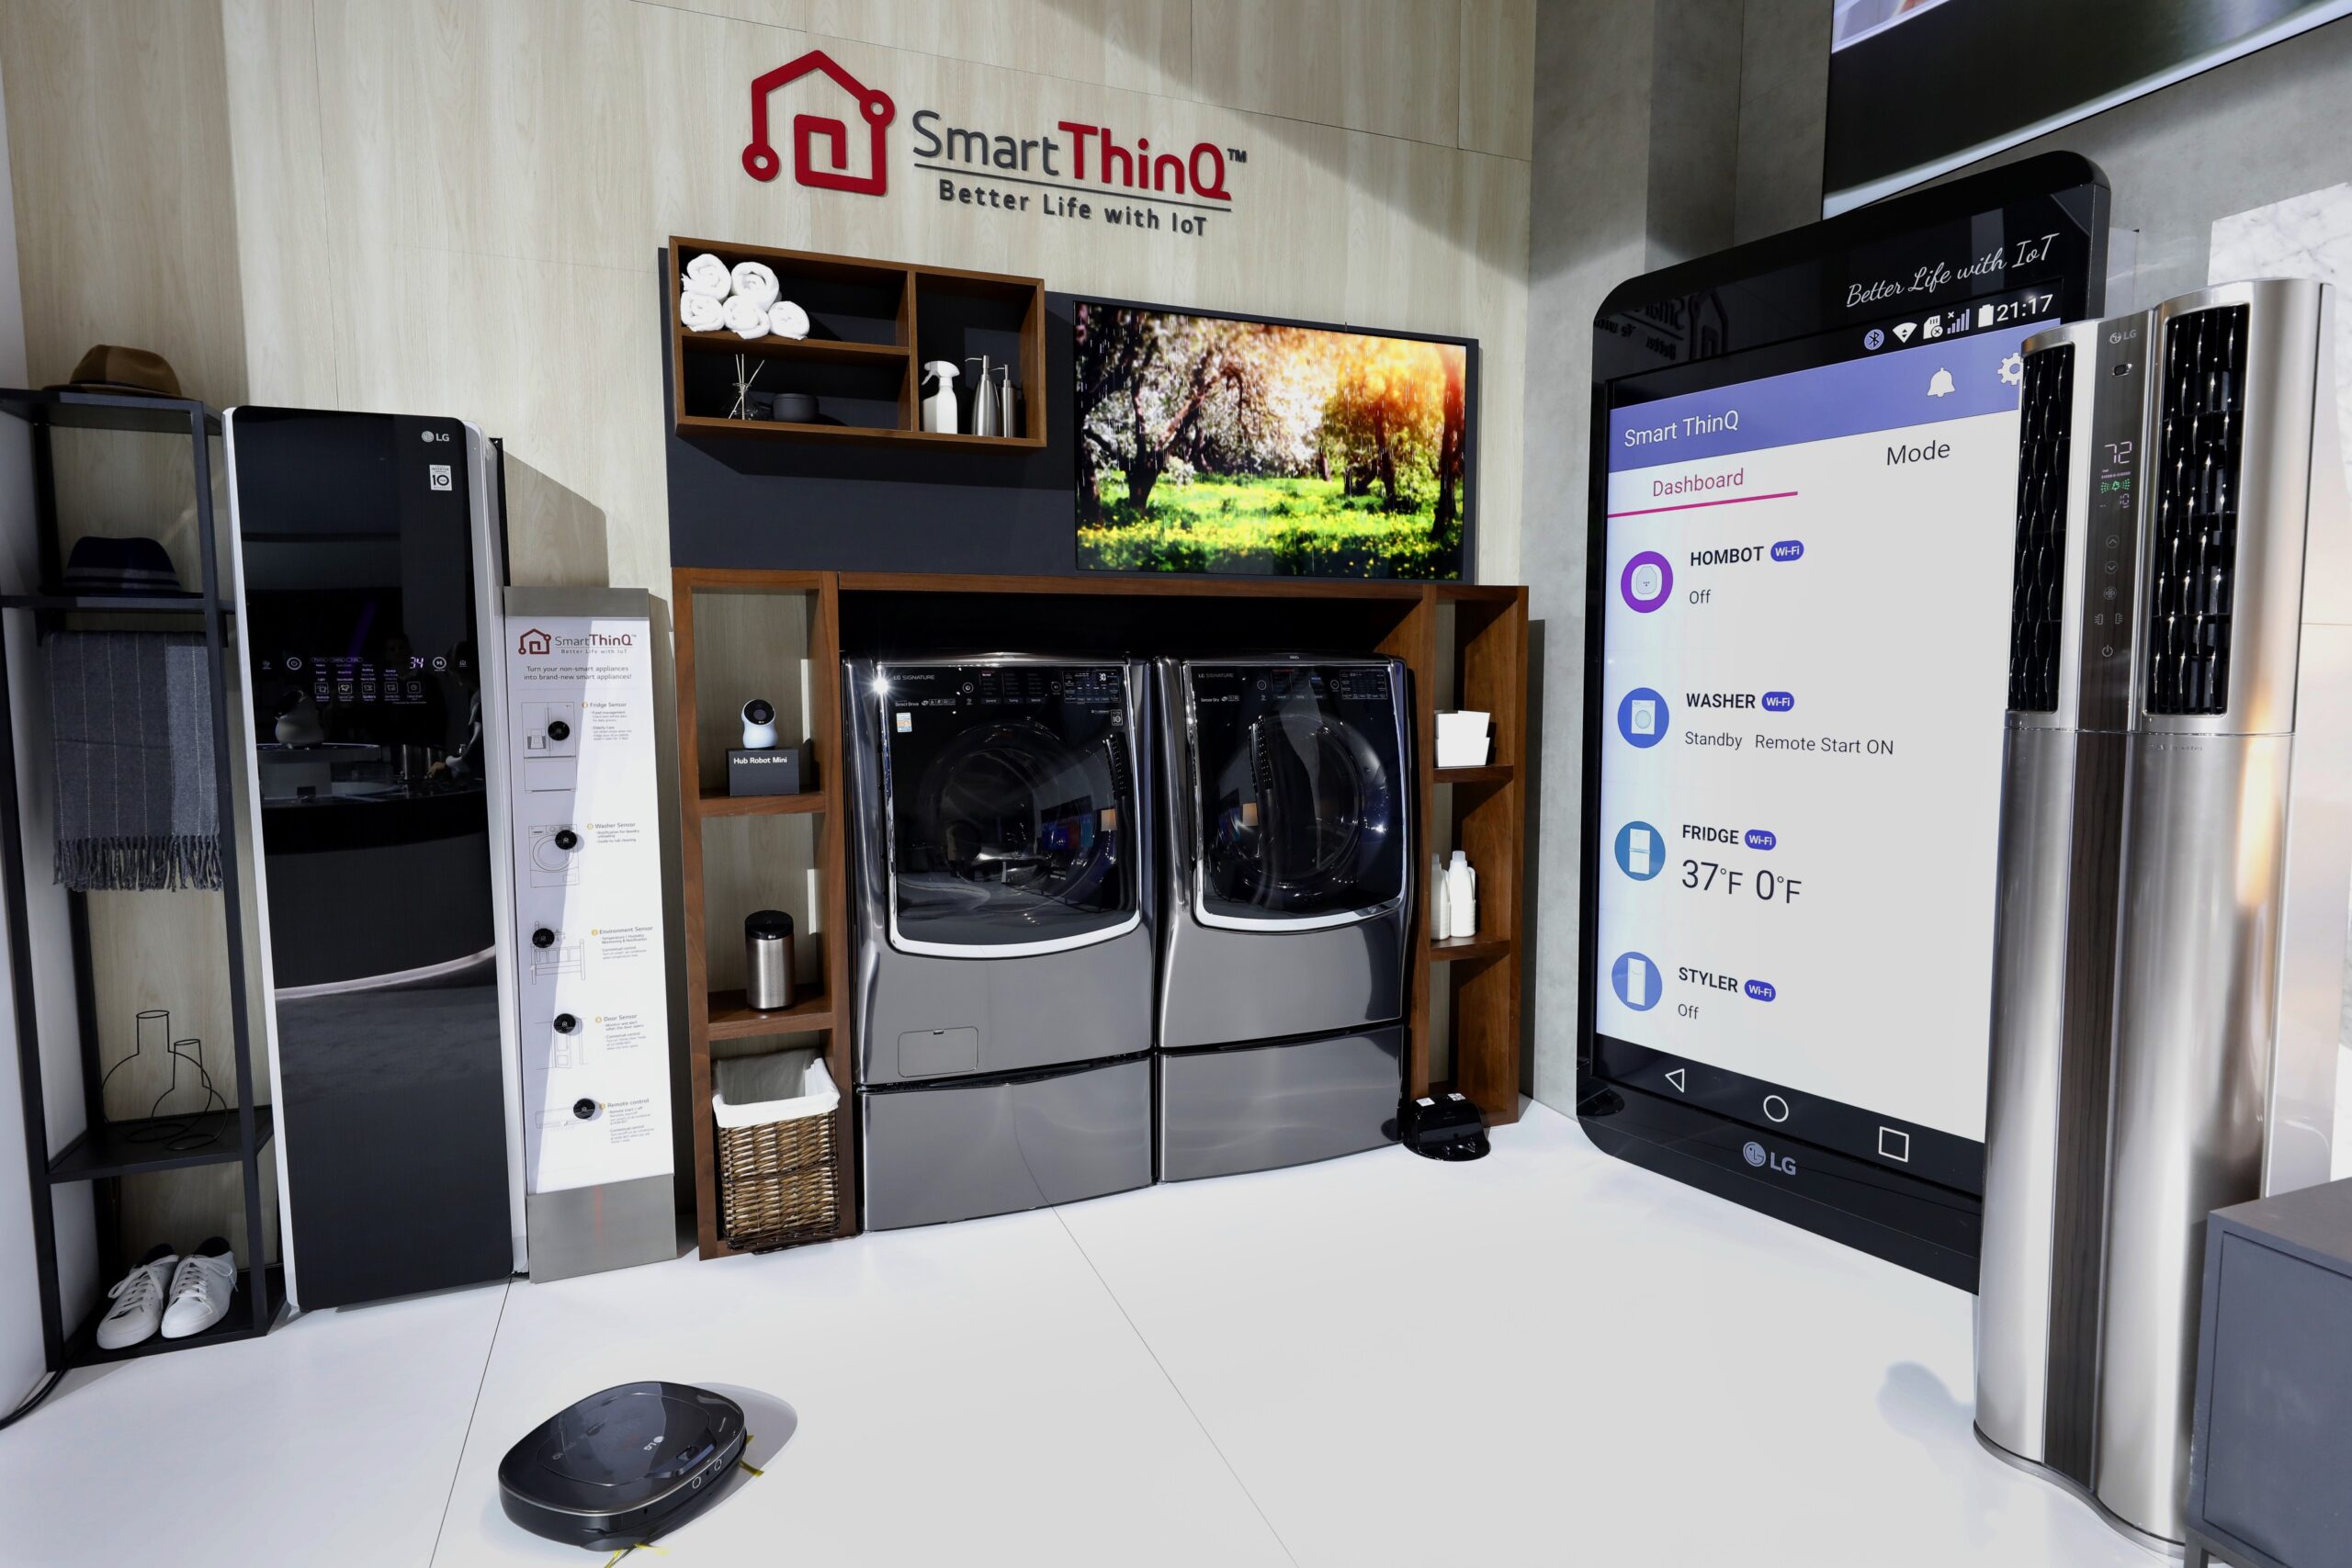 The LG Smart ThinQ zone with LG's AI-powered smart appliances and a large smartphone mock-up to demonstrate how to use an Smart ThinQ app to control appliances